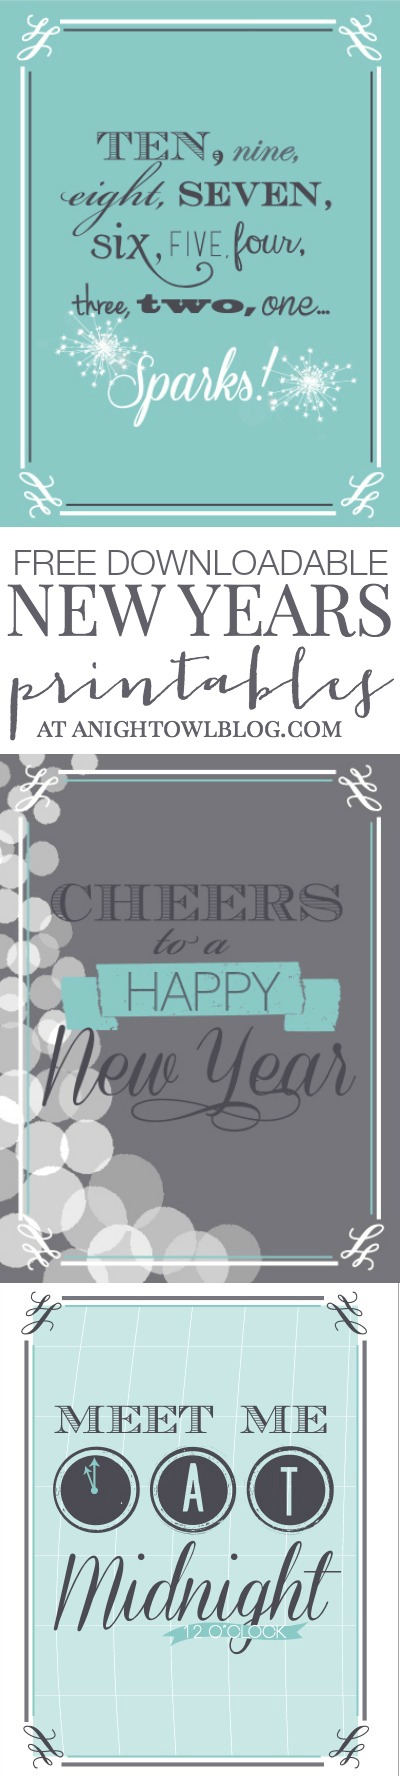 FREE Downloadable New Years Eve Printables at anightowlblog.com!